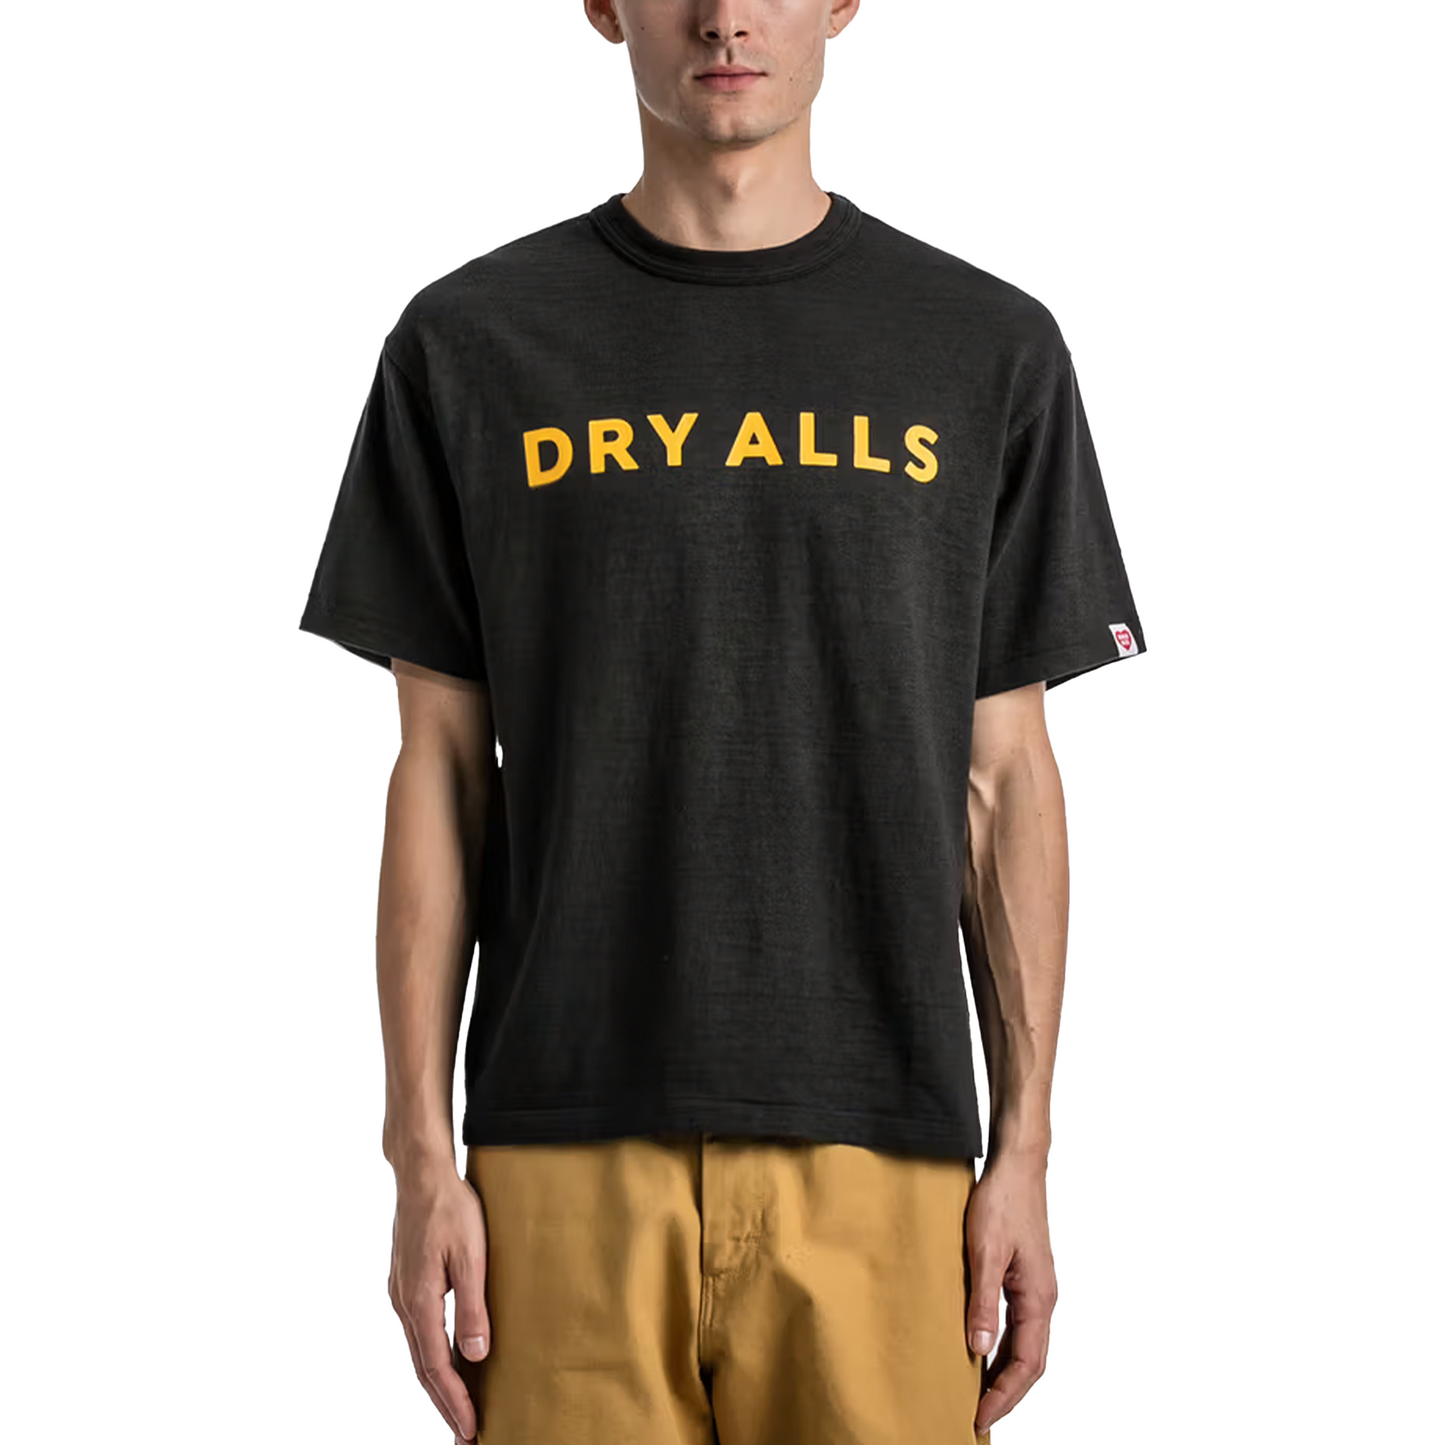 Human Made Dry Alls Graphic #10 Tee Black